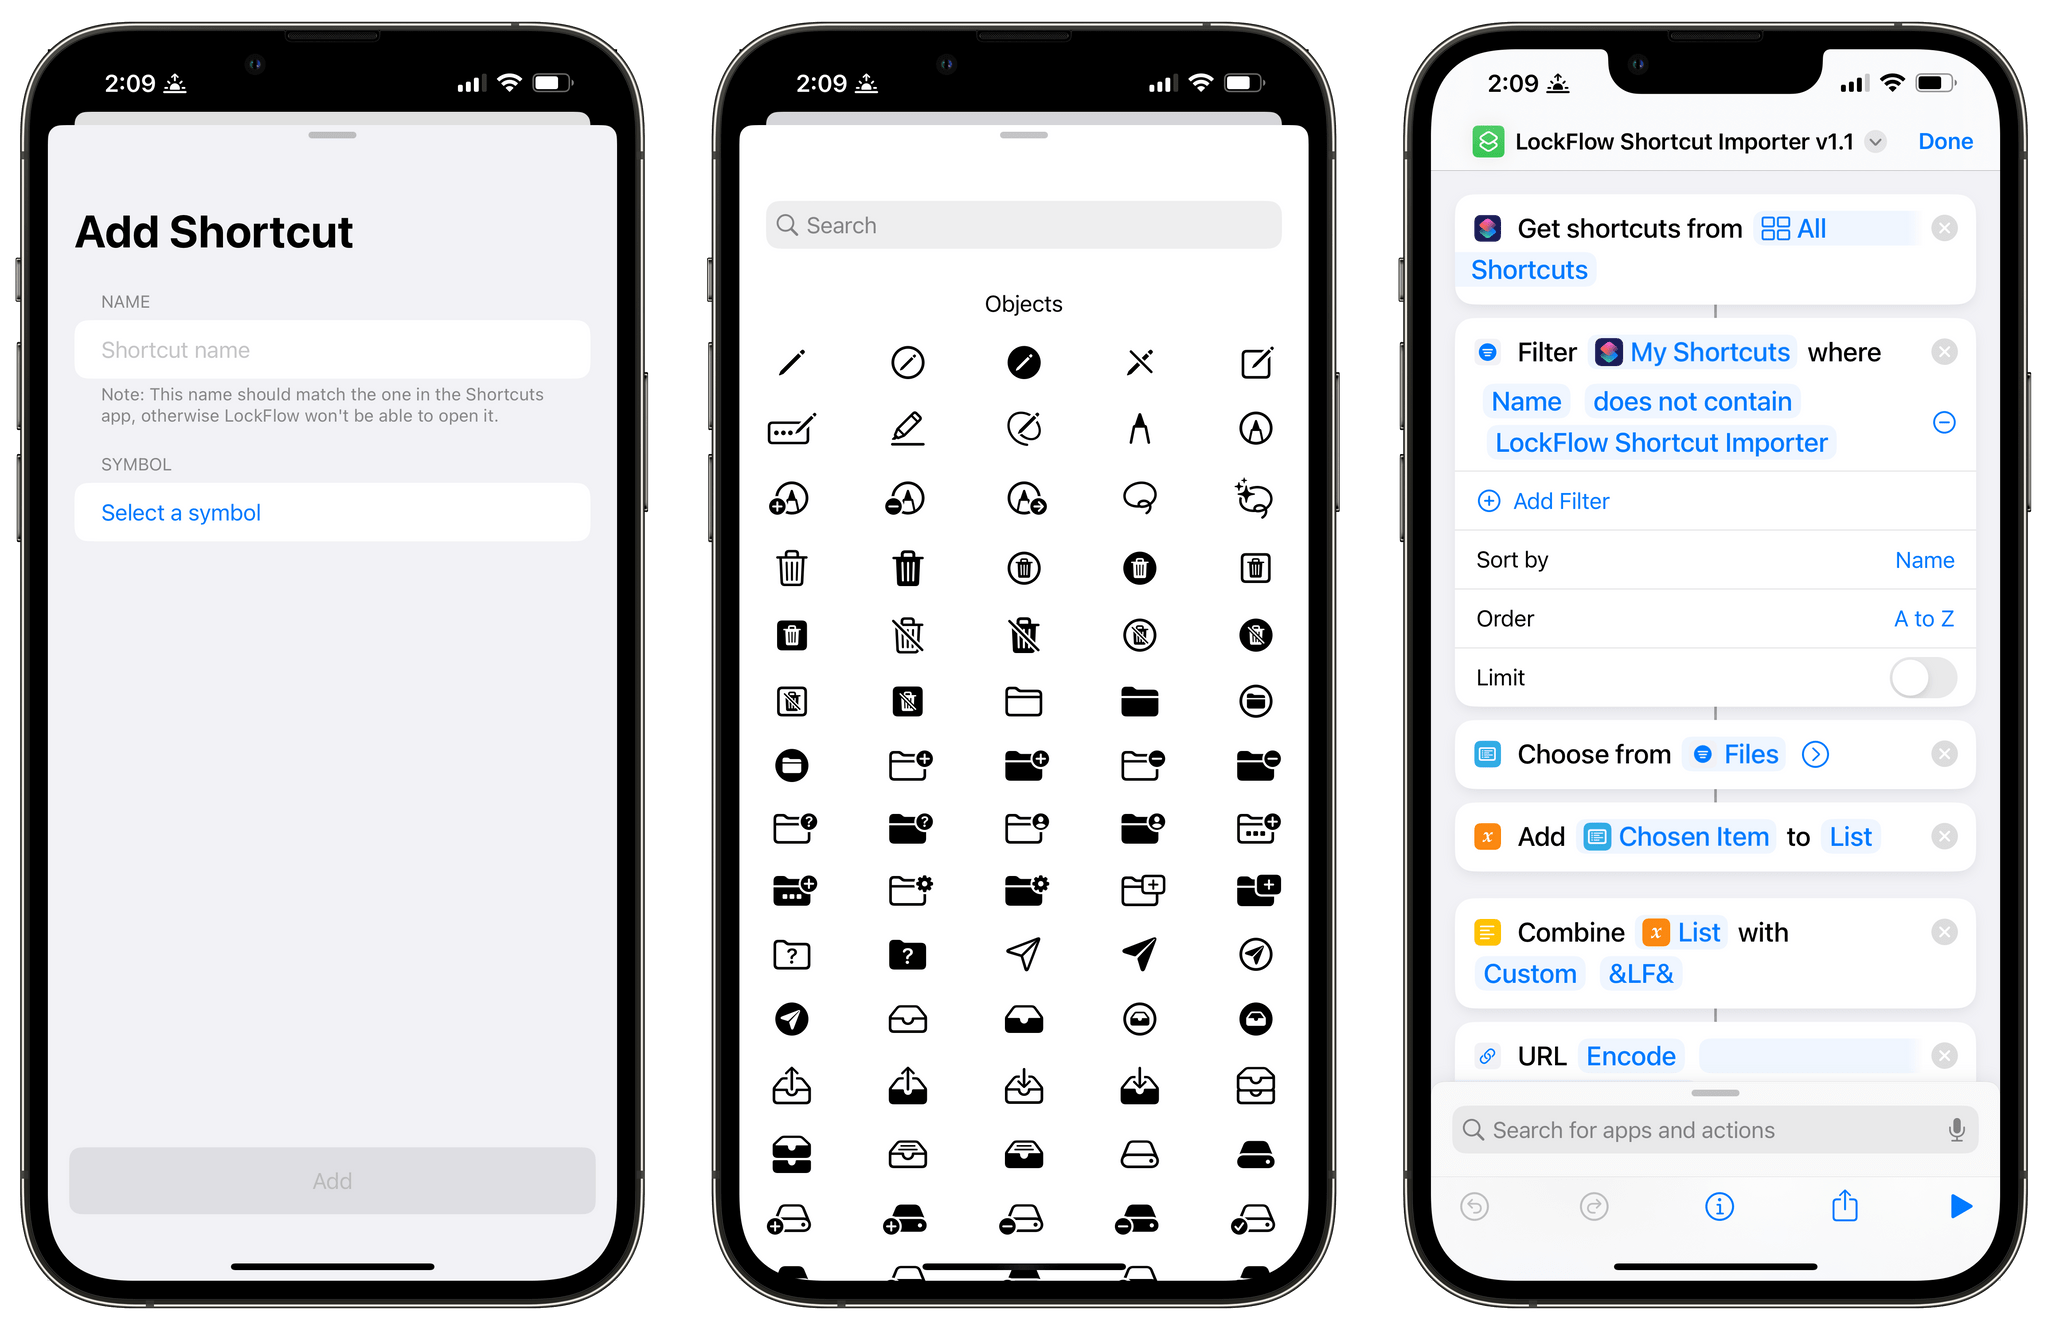 Adding a shortcut to LockFlow can be accomplished in the app or with a helper shortcut.